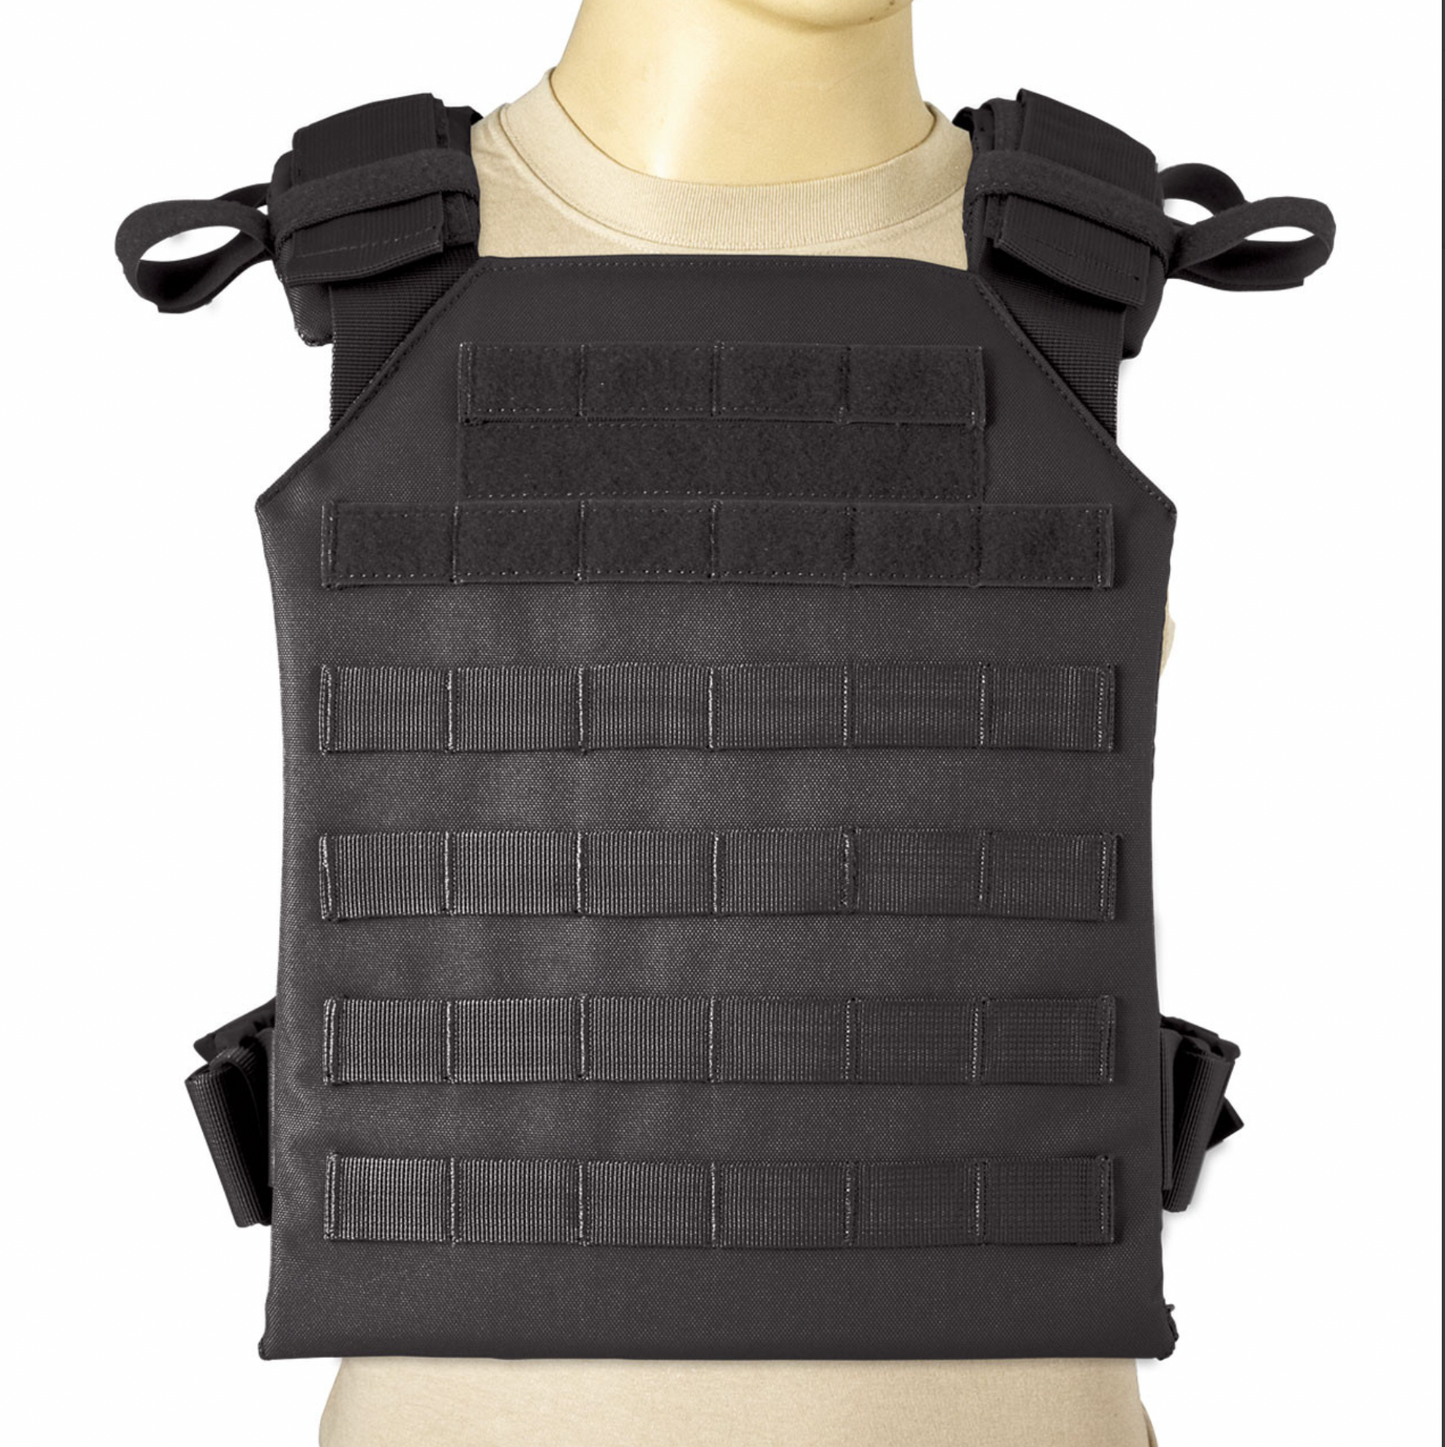 MOLLE Plate Carrier